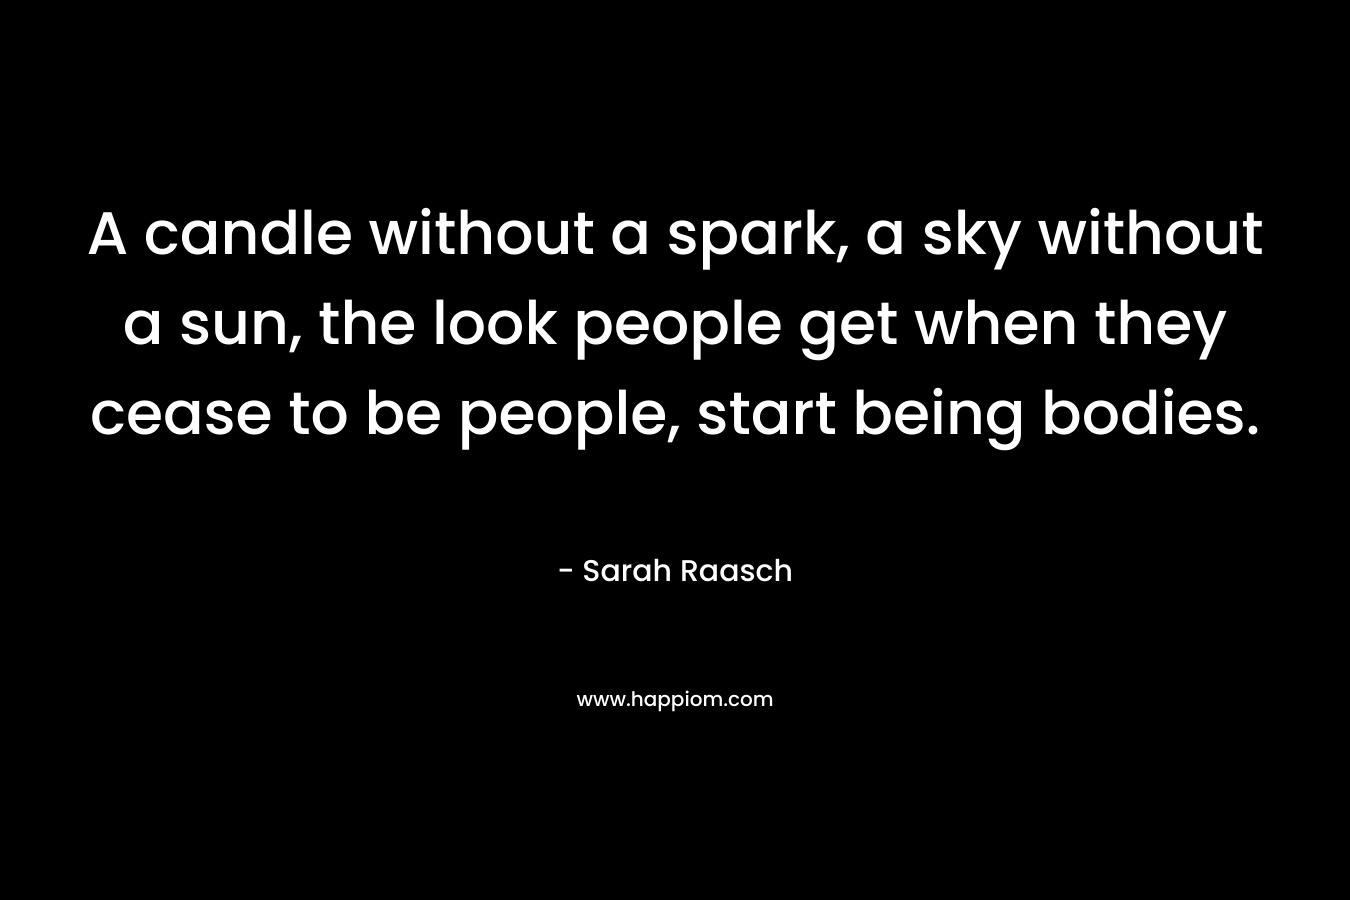 A candle without a spark, a sky without a sun, the look people get when they cease to be people, start being bodies. – Sarah Raasch